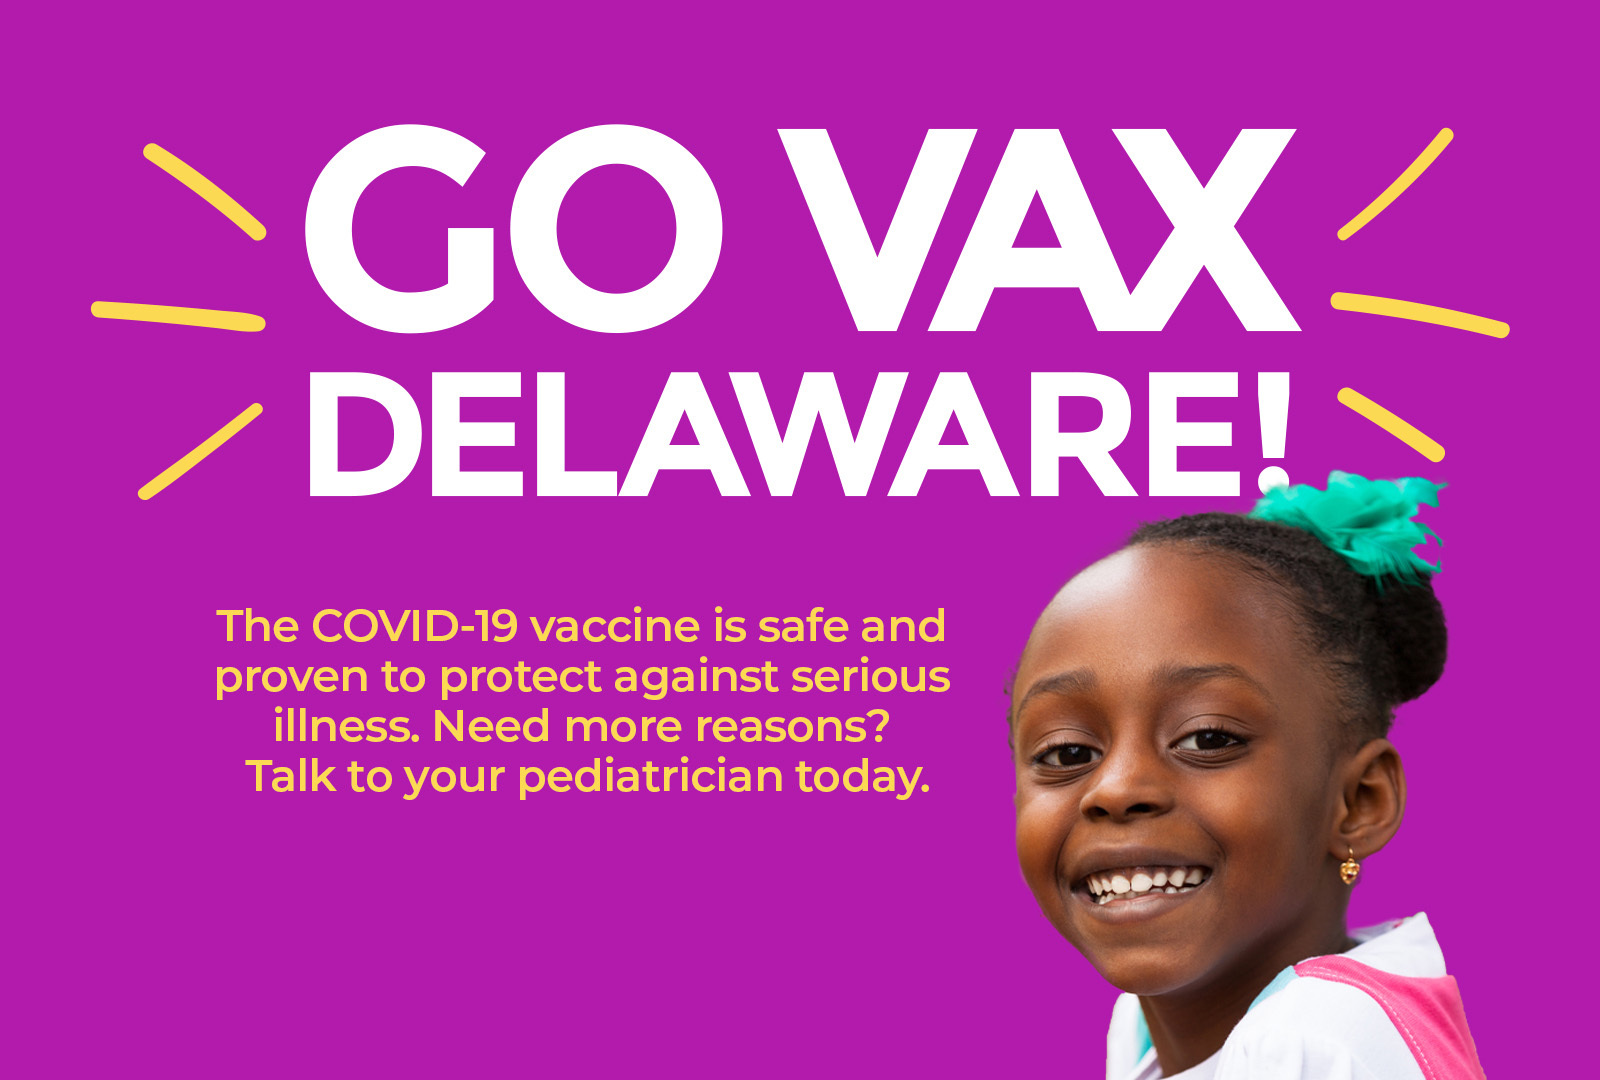 GO VAX Delaware! The COVID-19 vaccine is safe and proven to protect against serious illness. Need more reasons? Talk to your pediatrician today.